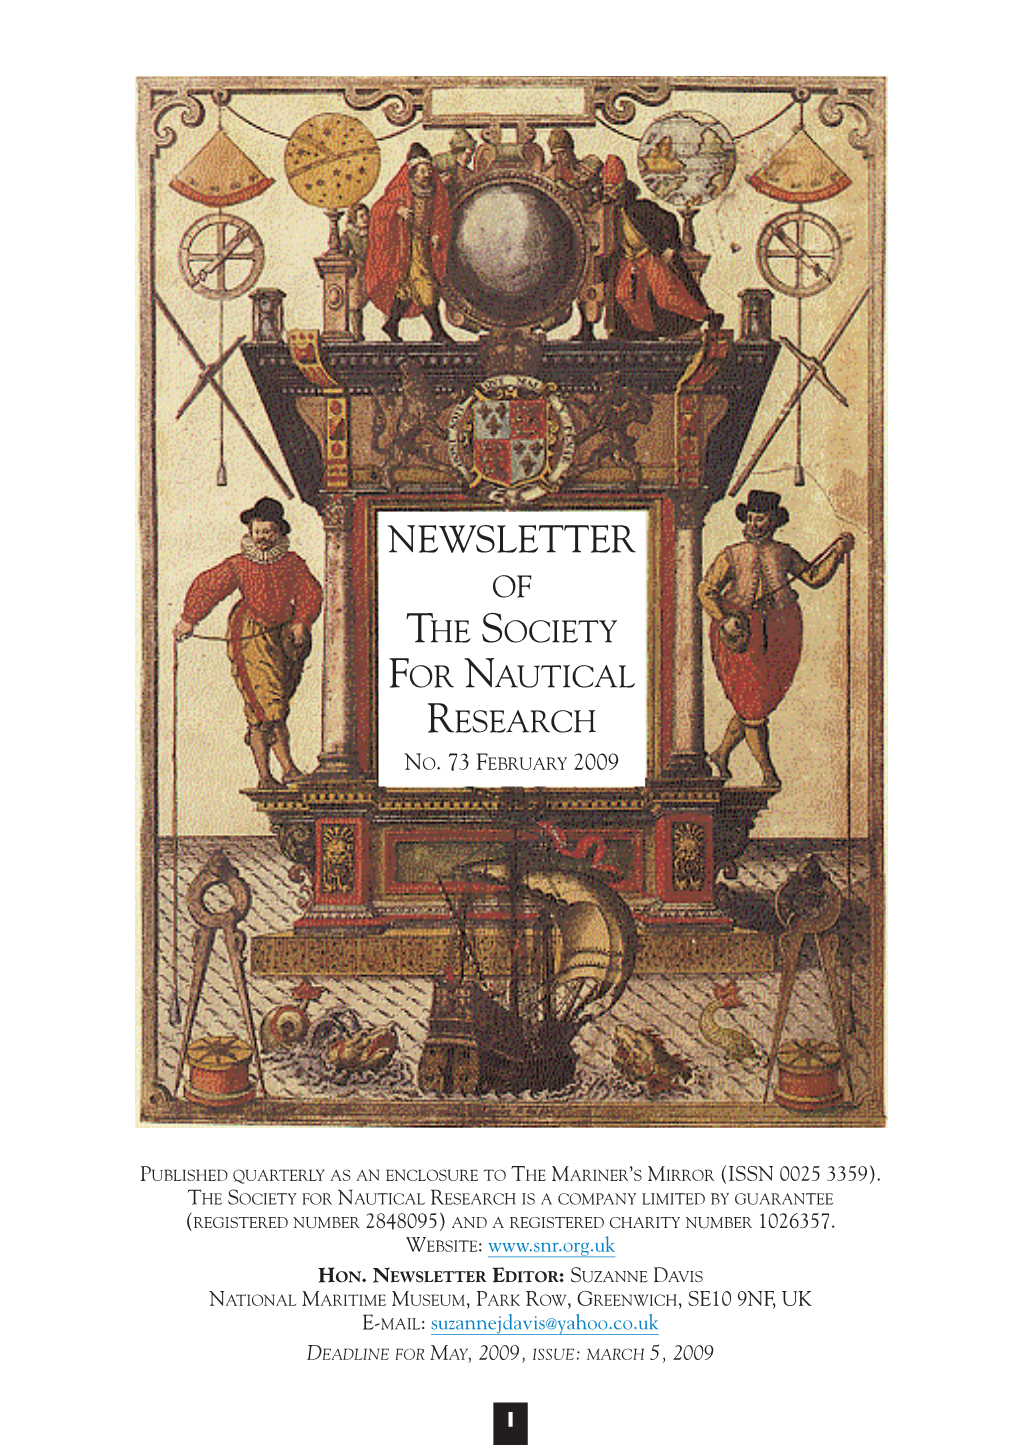 Newsletter of the Society for Nautical Research No